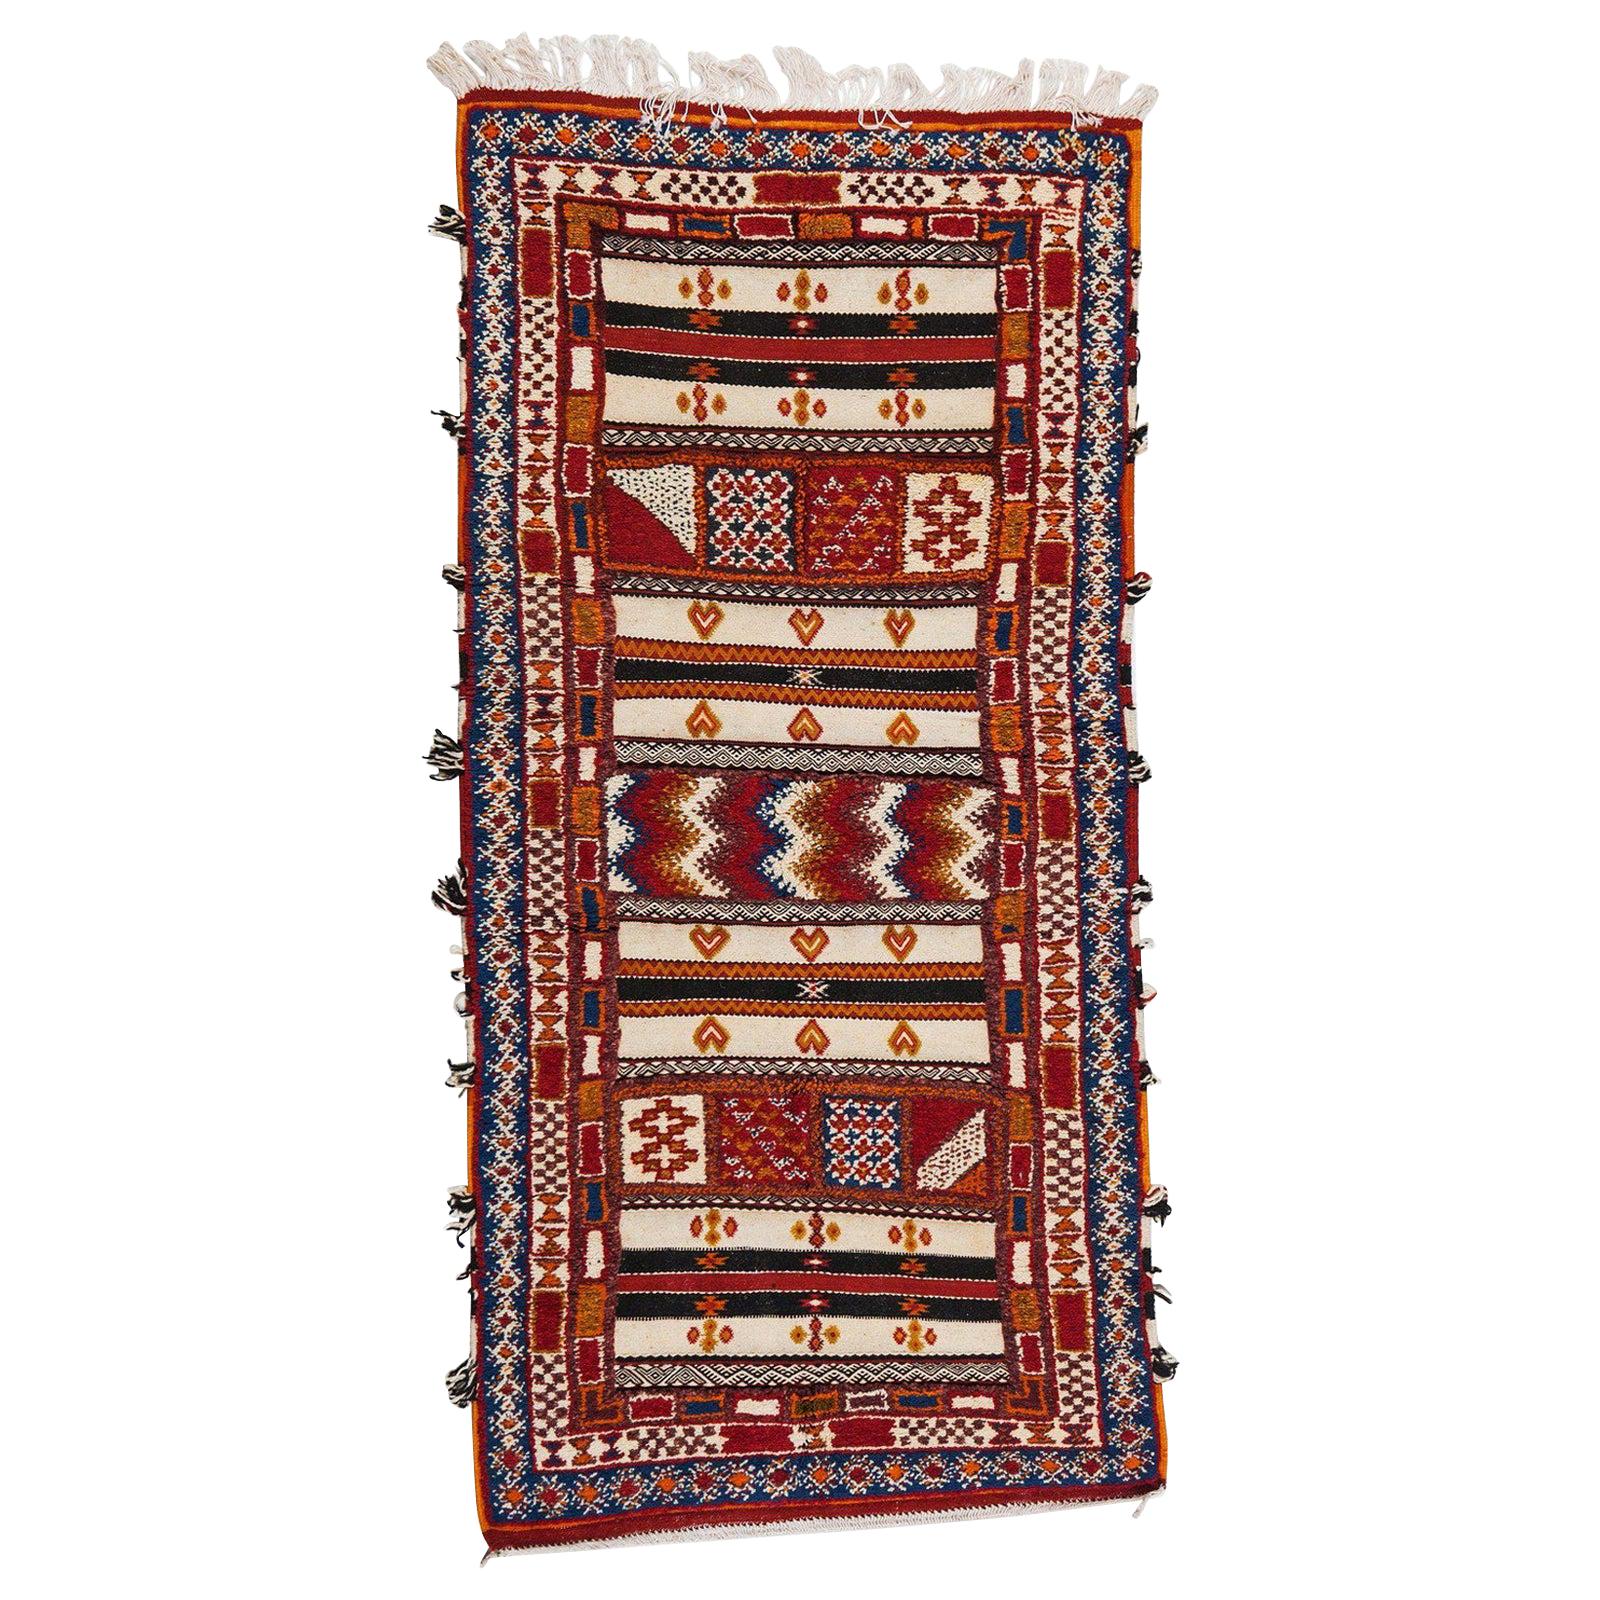 Moroccan Rug or Carpet with Tribal Design